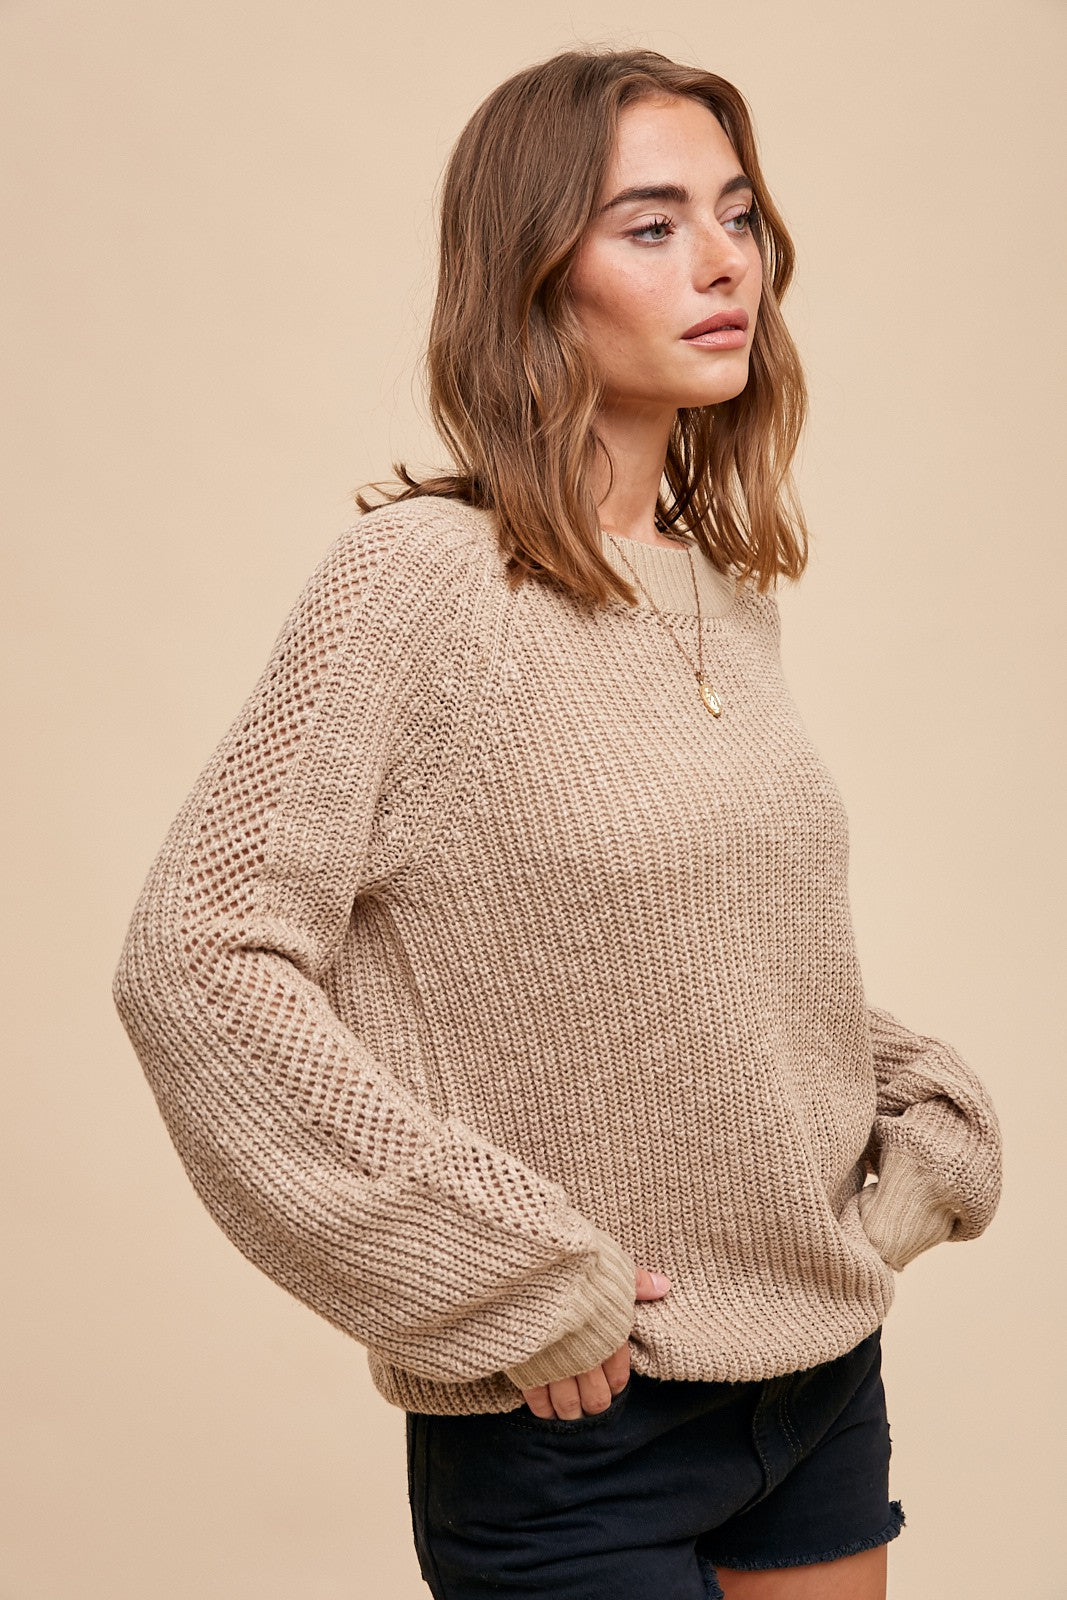 Canton Knit Long Sleeve Sweater in taupe * on sale